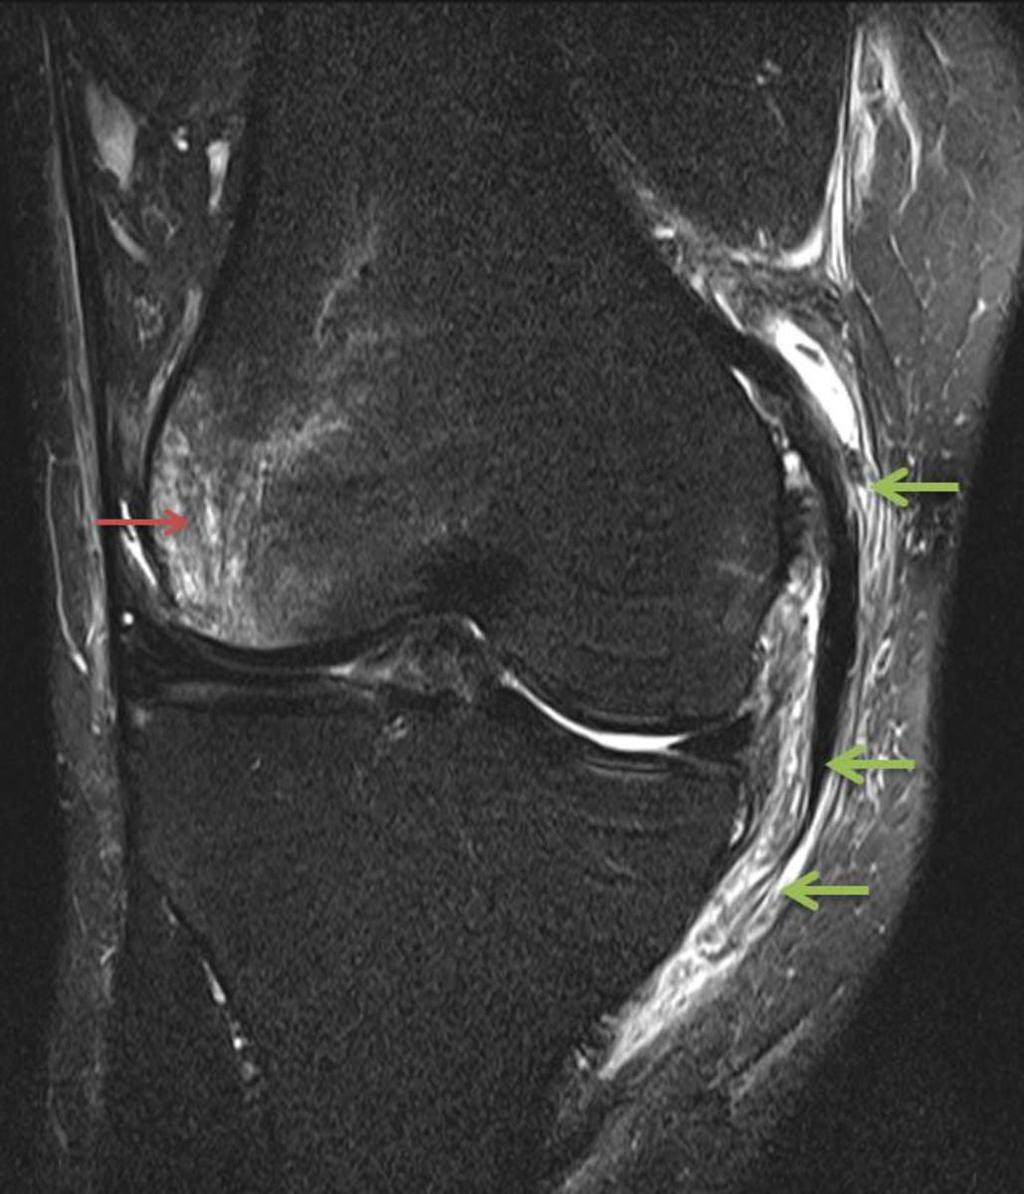 Fig. 2: Clip type of injury seen in contact sports with valgus stress to the knee.